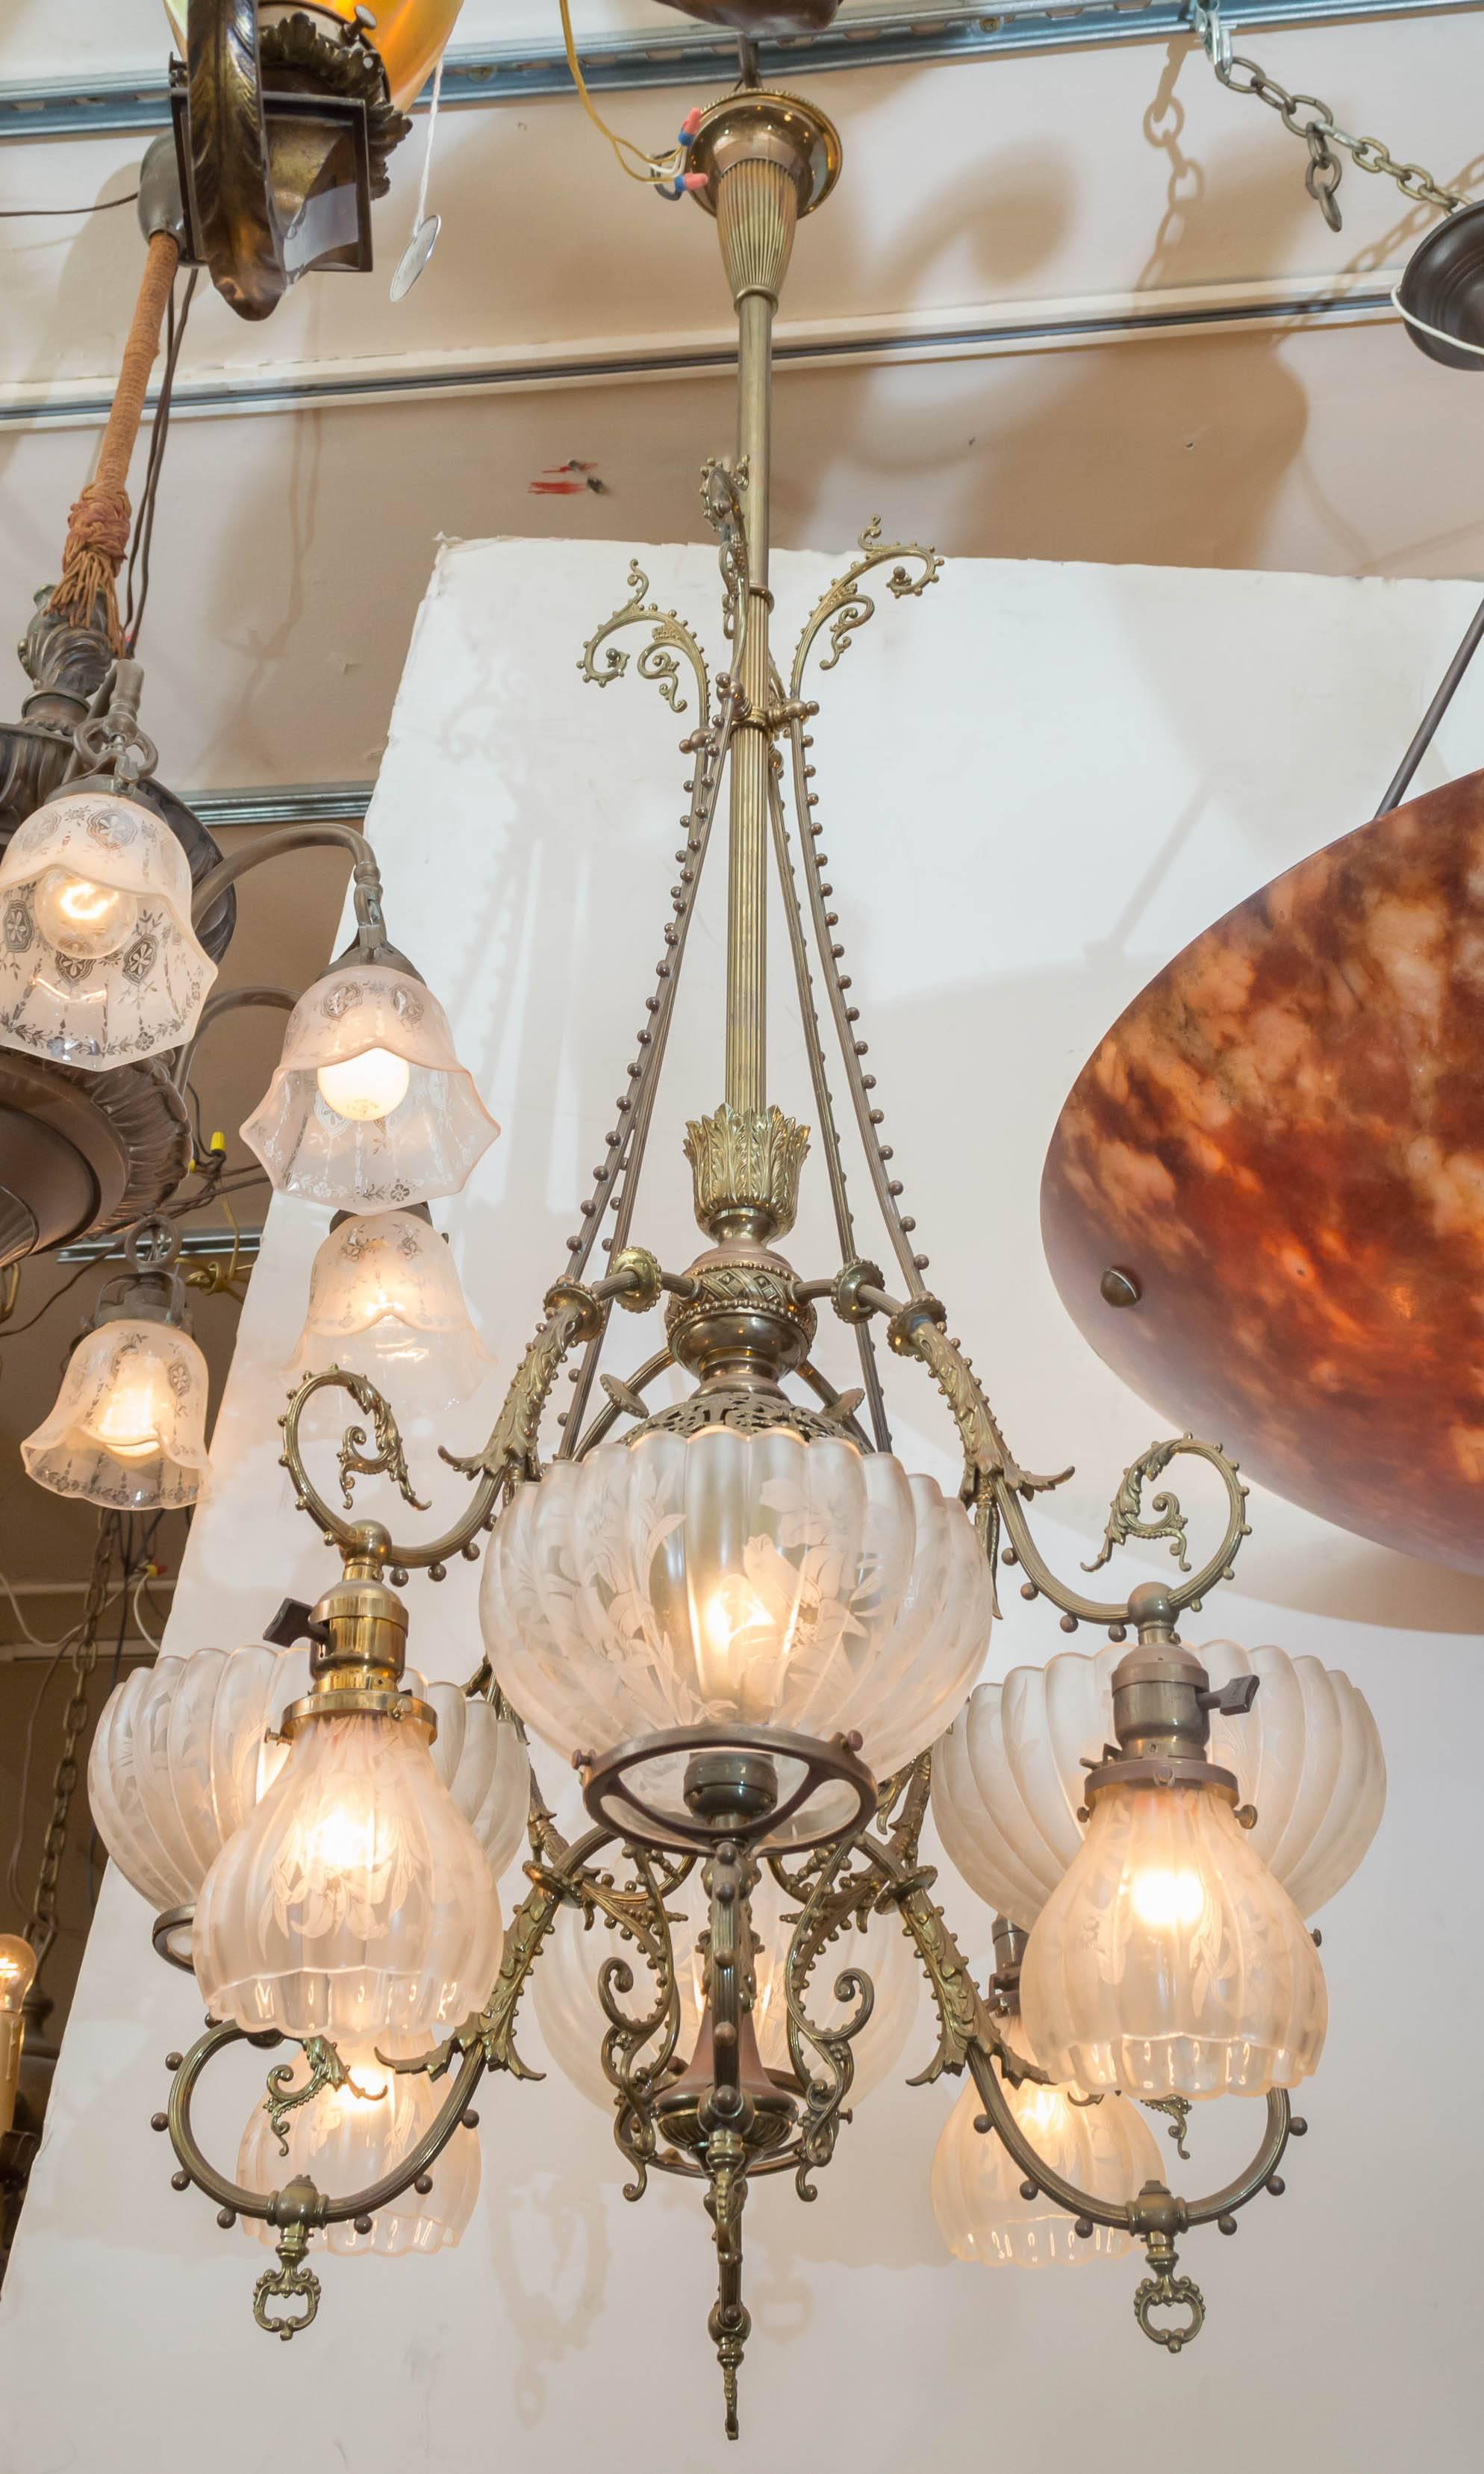 This is certainly one of the finest combination gas and electric chandeliers we have offered in a very long time. People love that pierced ball center. Please check this one out for size and quality. The deep etched period, original shades just